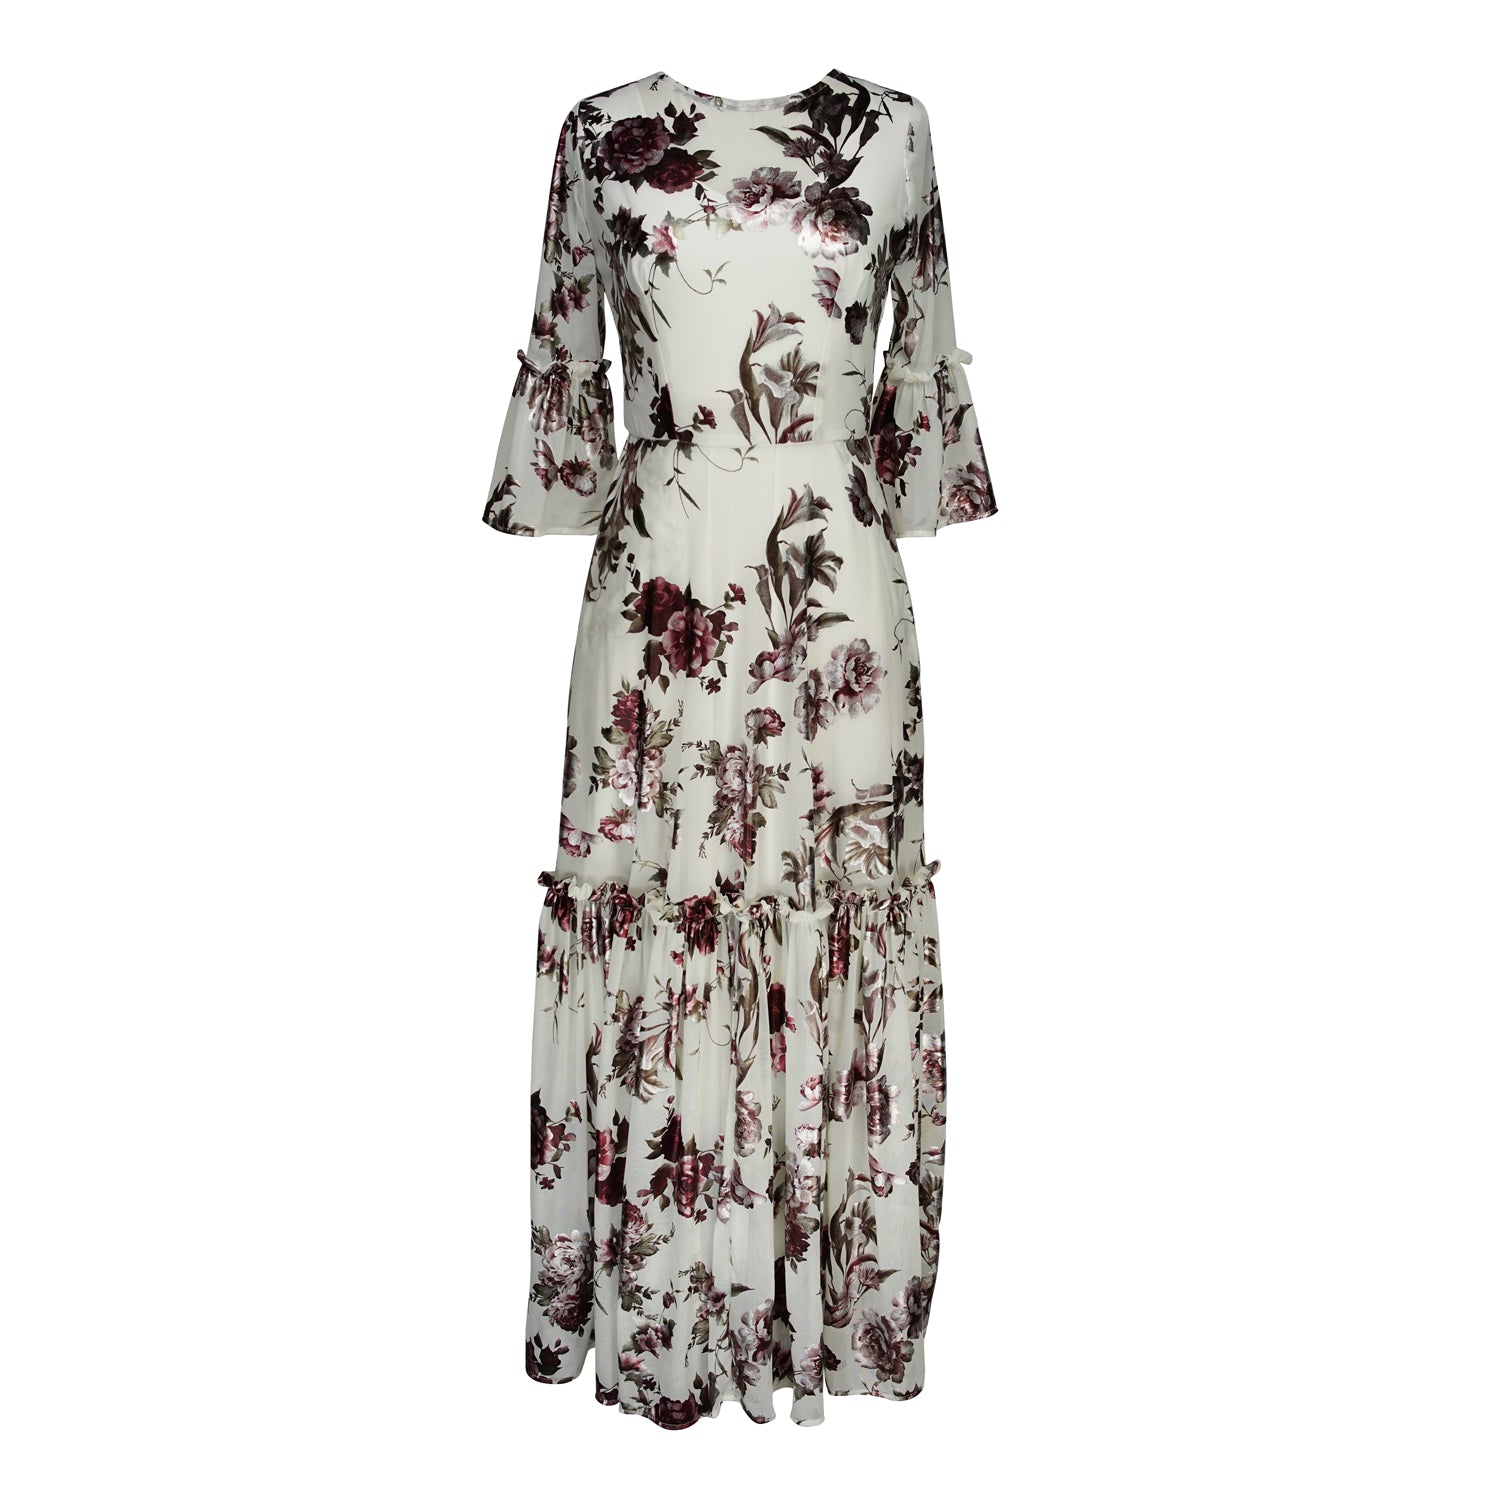 An airy ruffled maxi dress. Made with an airy and metallic detail floral mesh fabric featuring pockets, mid-length bell sleeves, and a full, single-tiered skirt with ankle hem. Includes a matching slip dress that can be worn on its own.